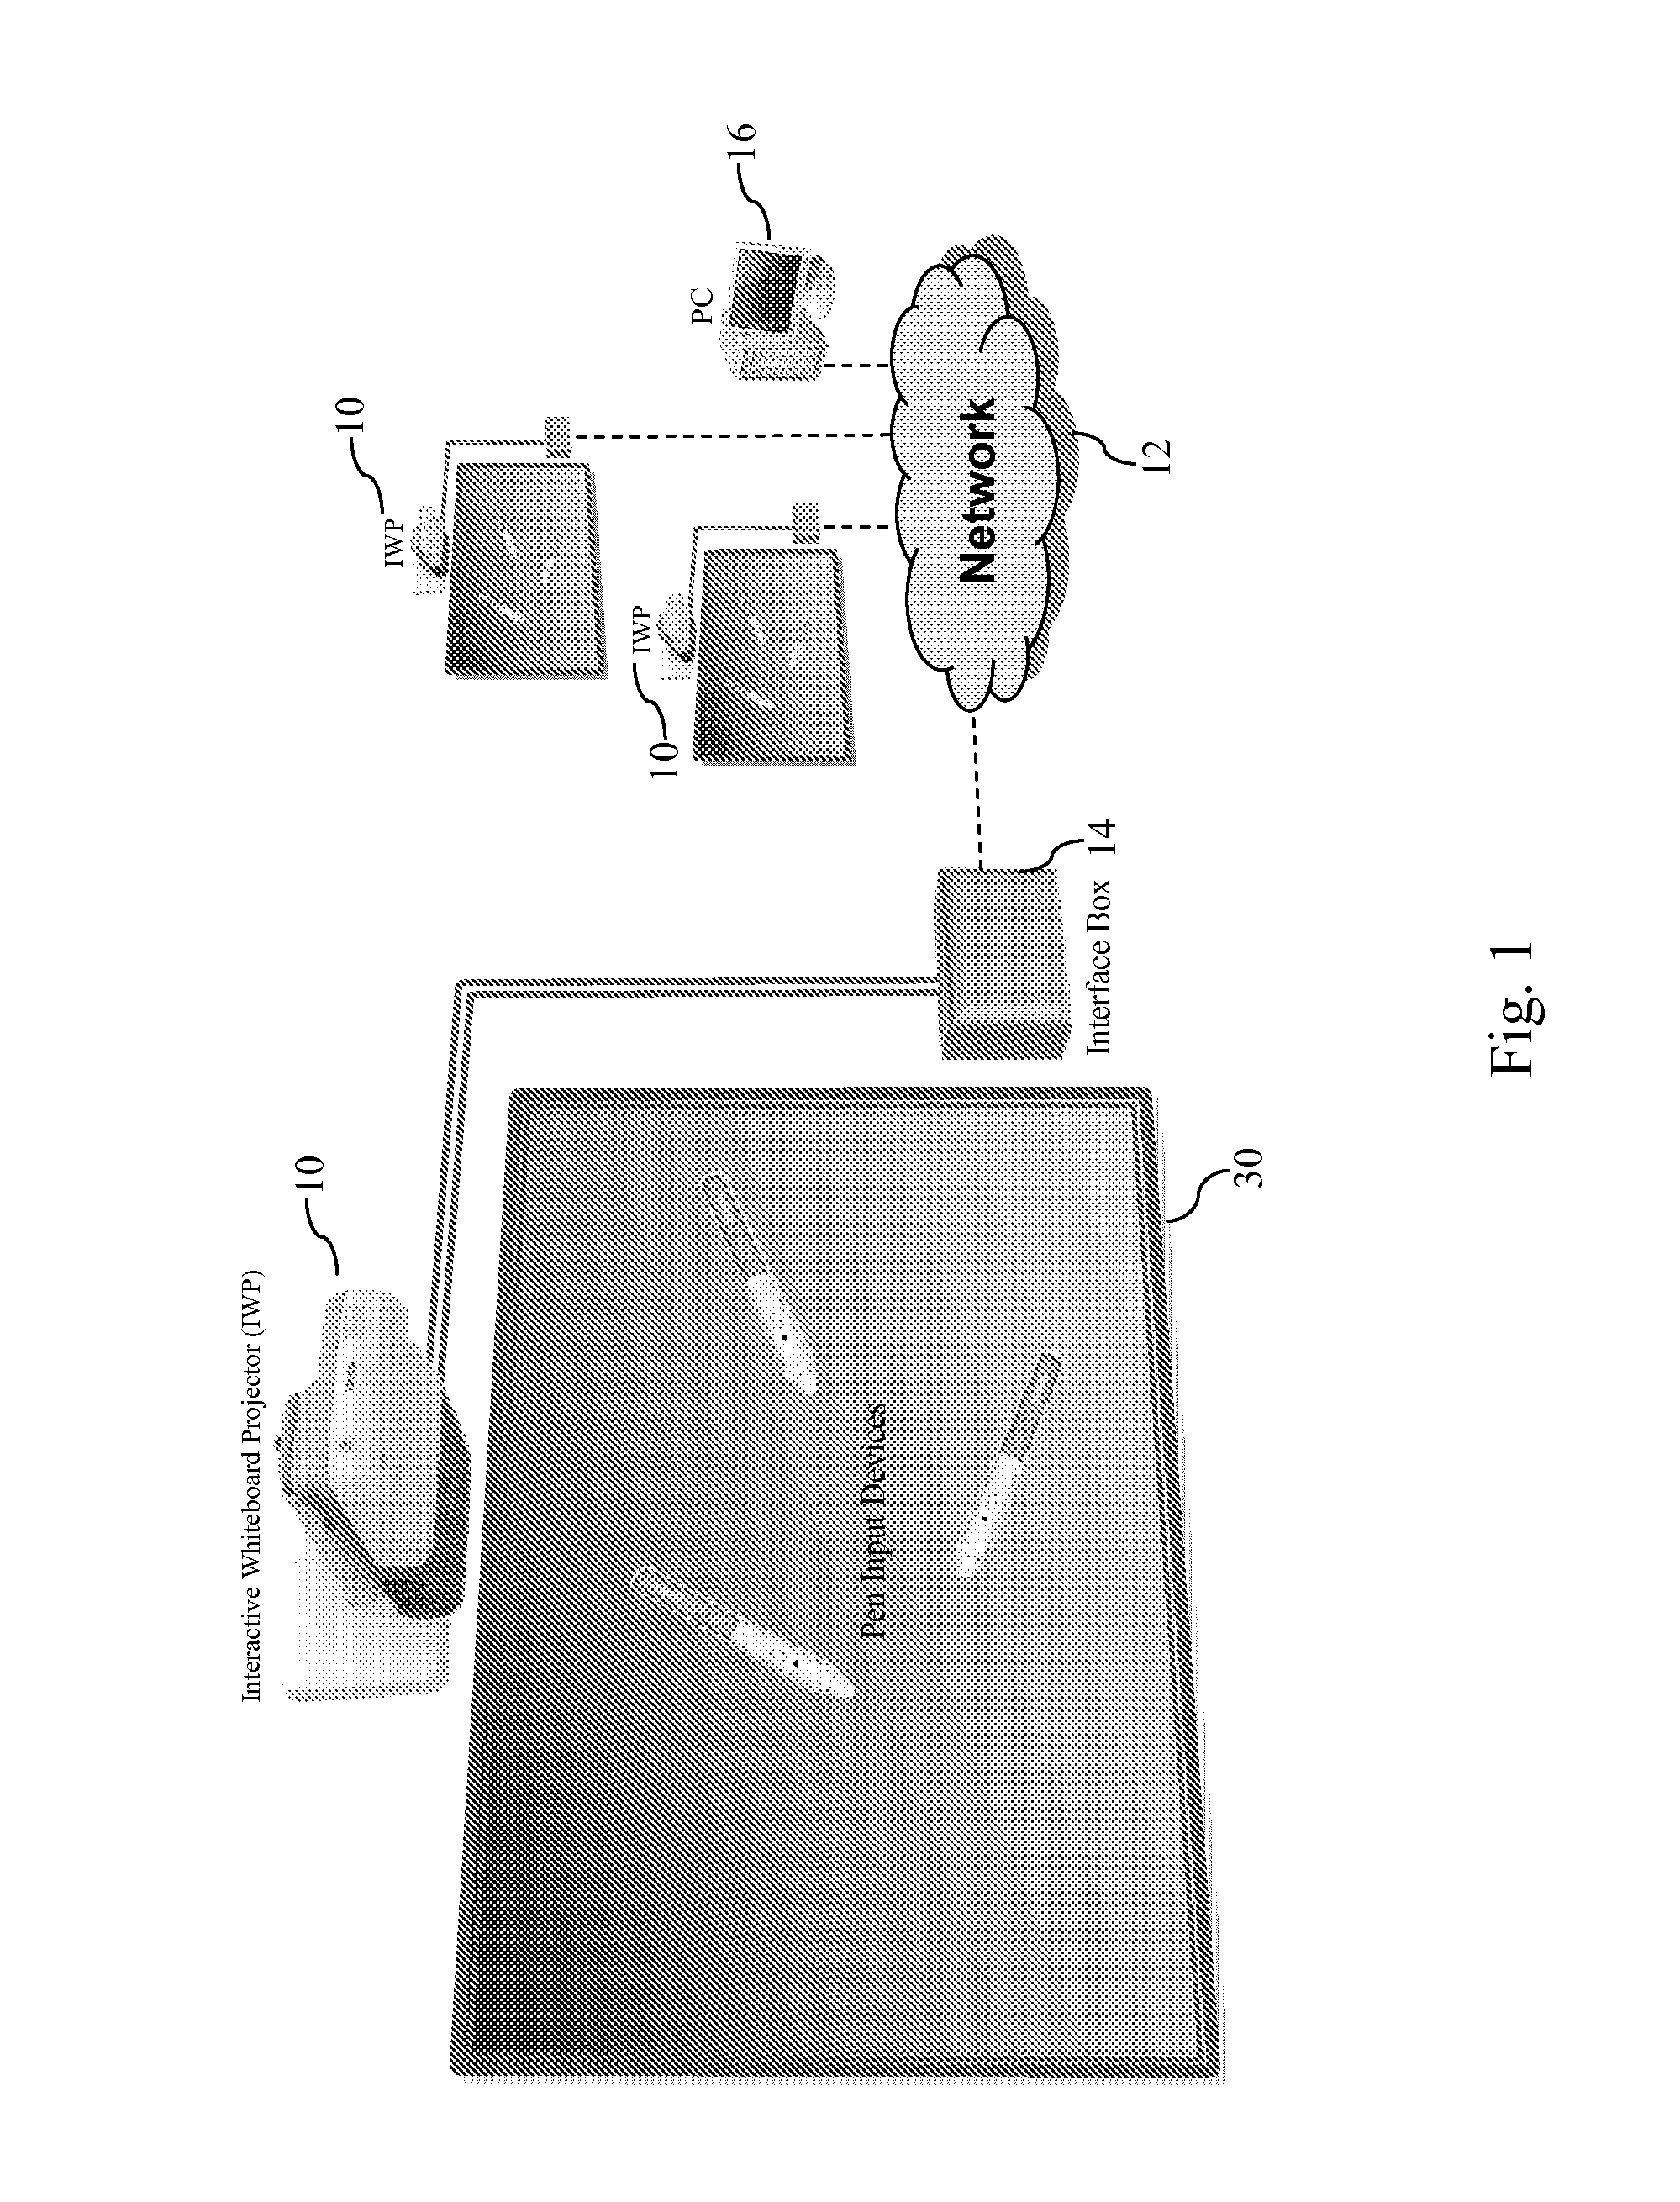 Method for Providing Multiple Mouse Inputs in a Remote Desktop Session